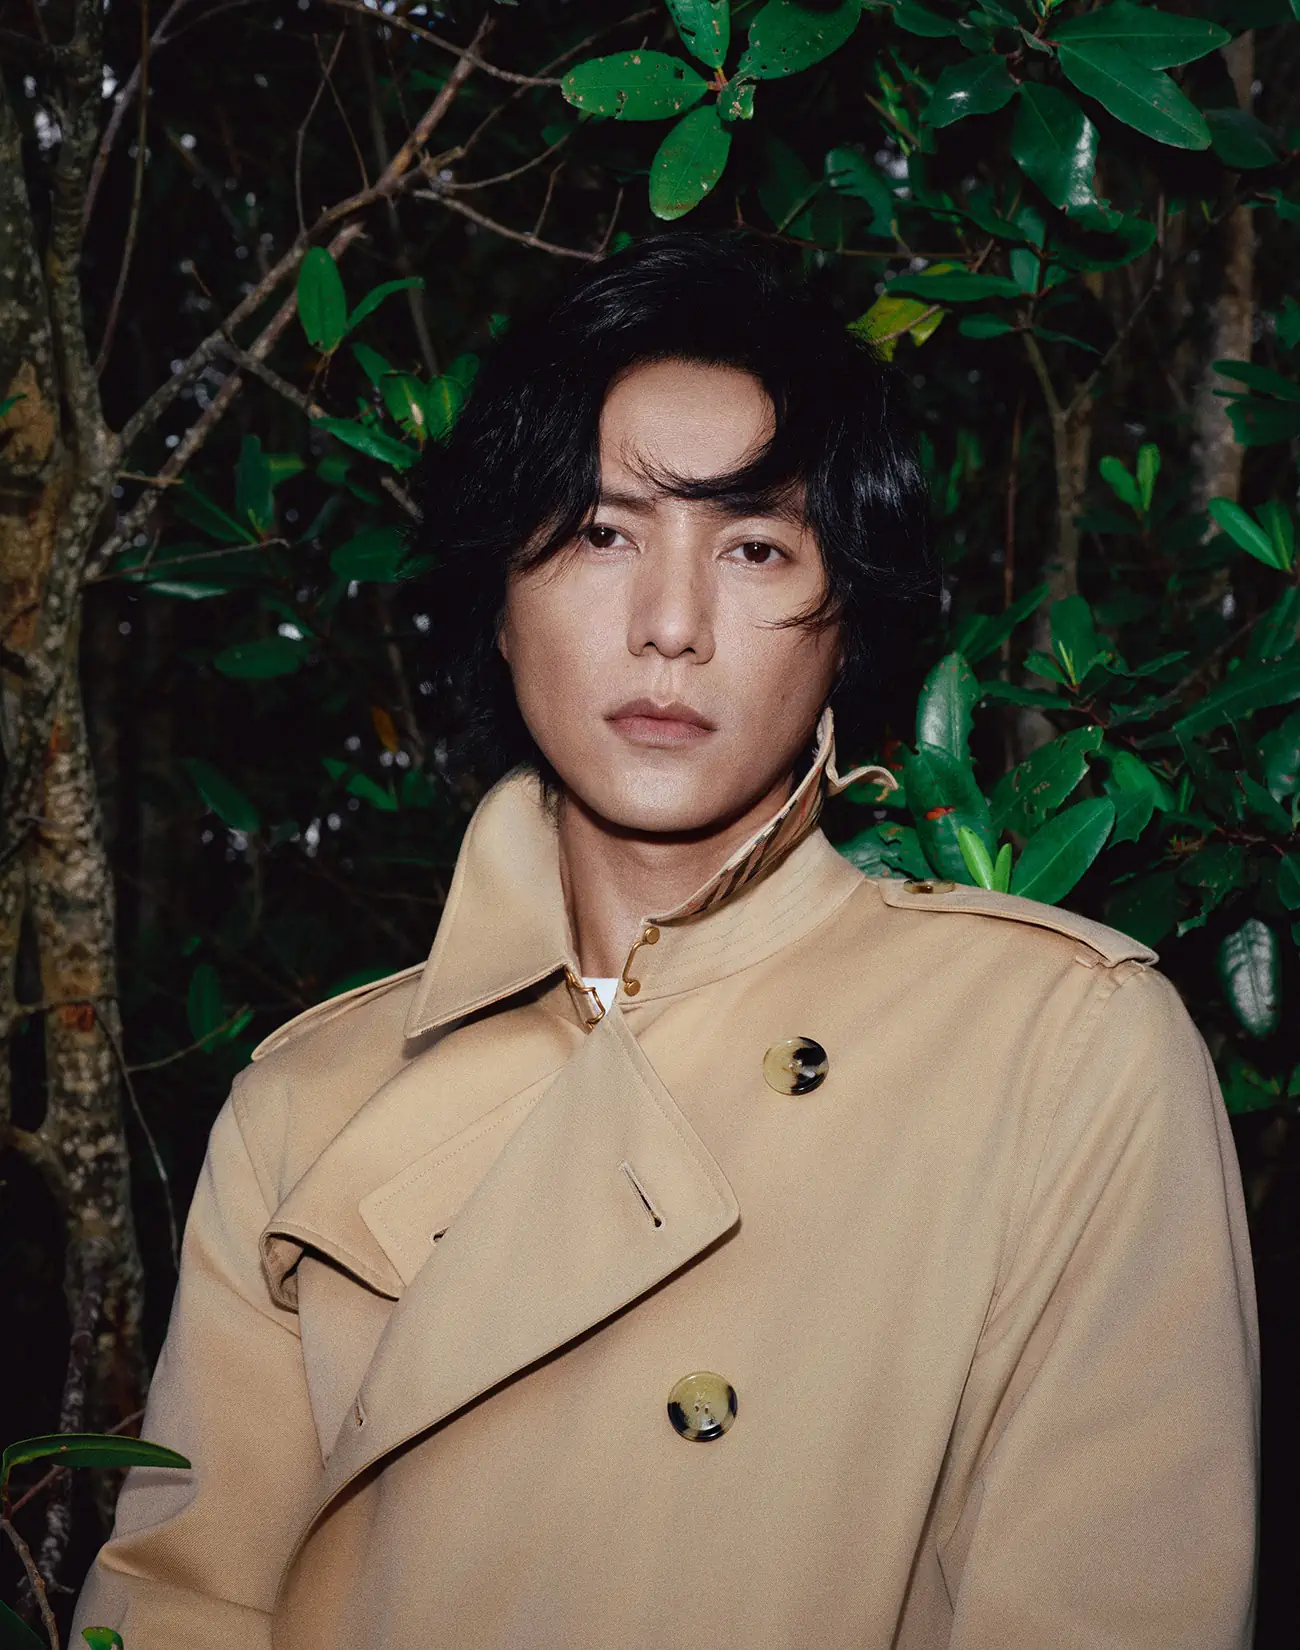 Burberry selects Chinese actor Chen Kun as global brand ambassador